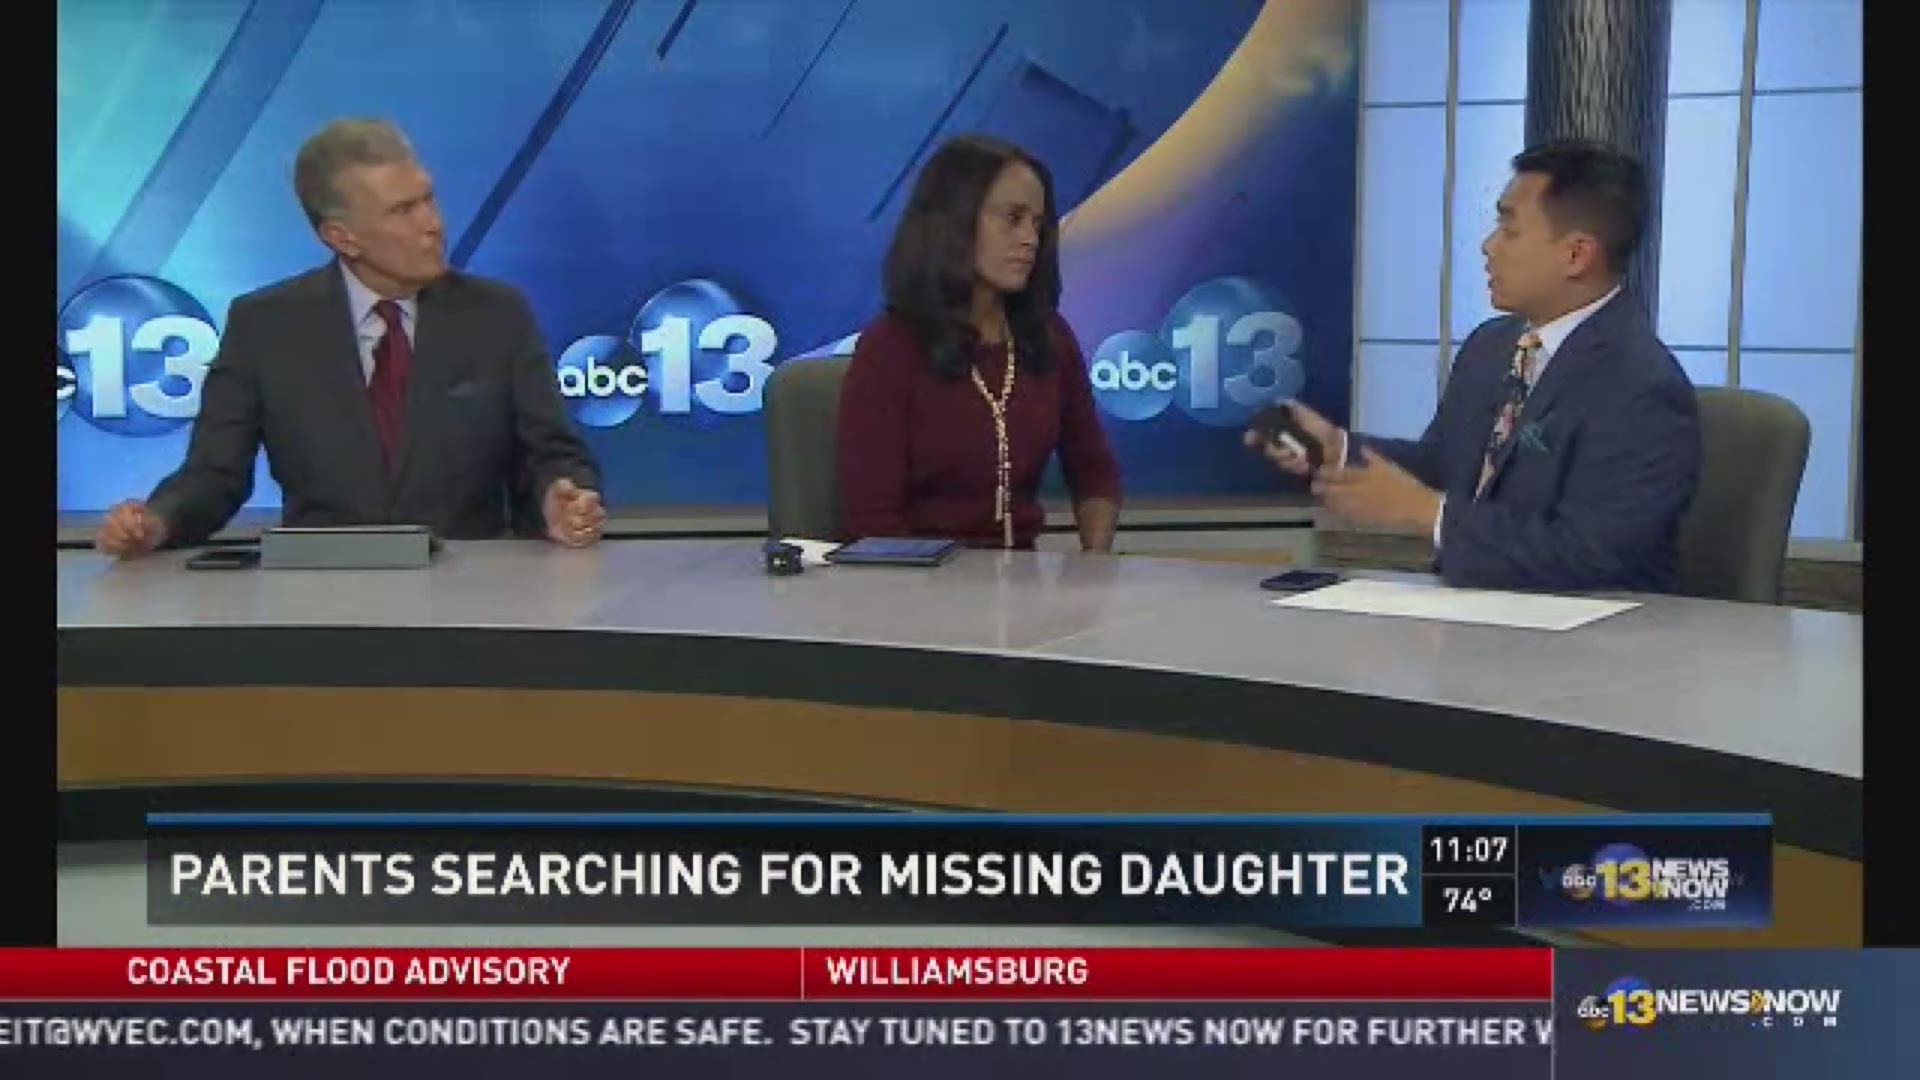 Continuing coverage of the abduction and murder of Ashanti Billie.